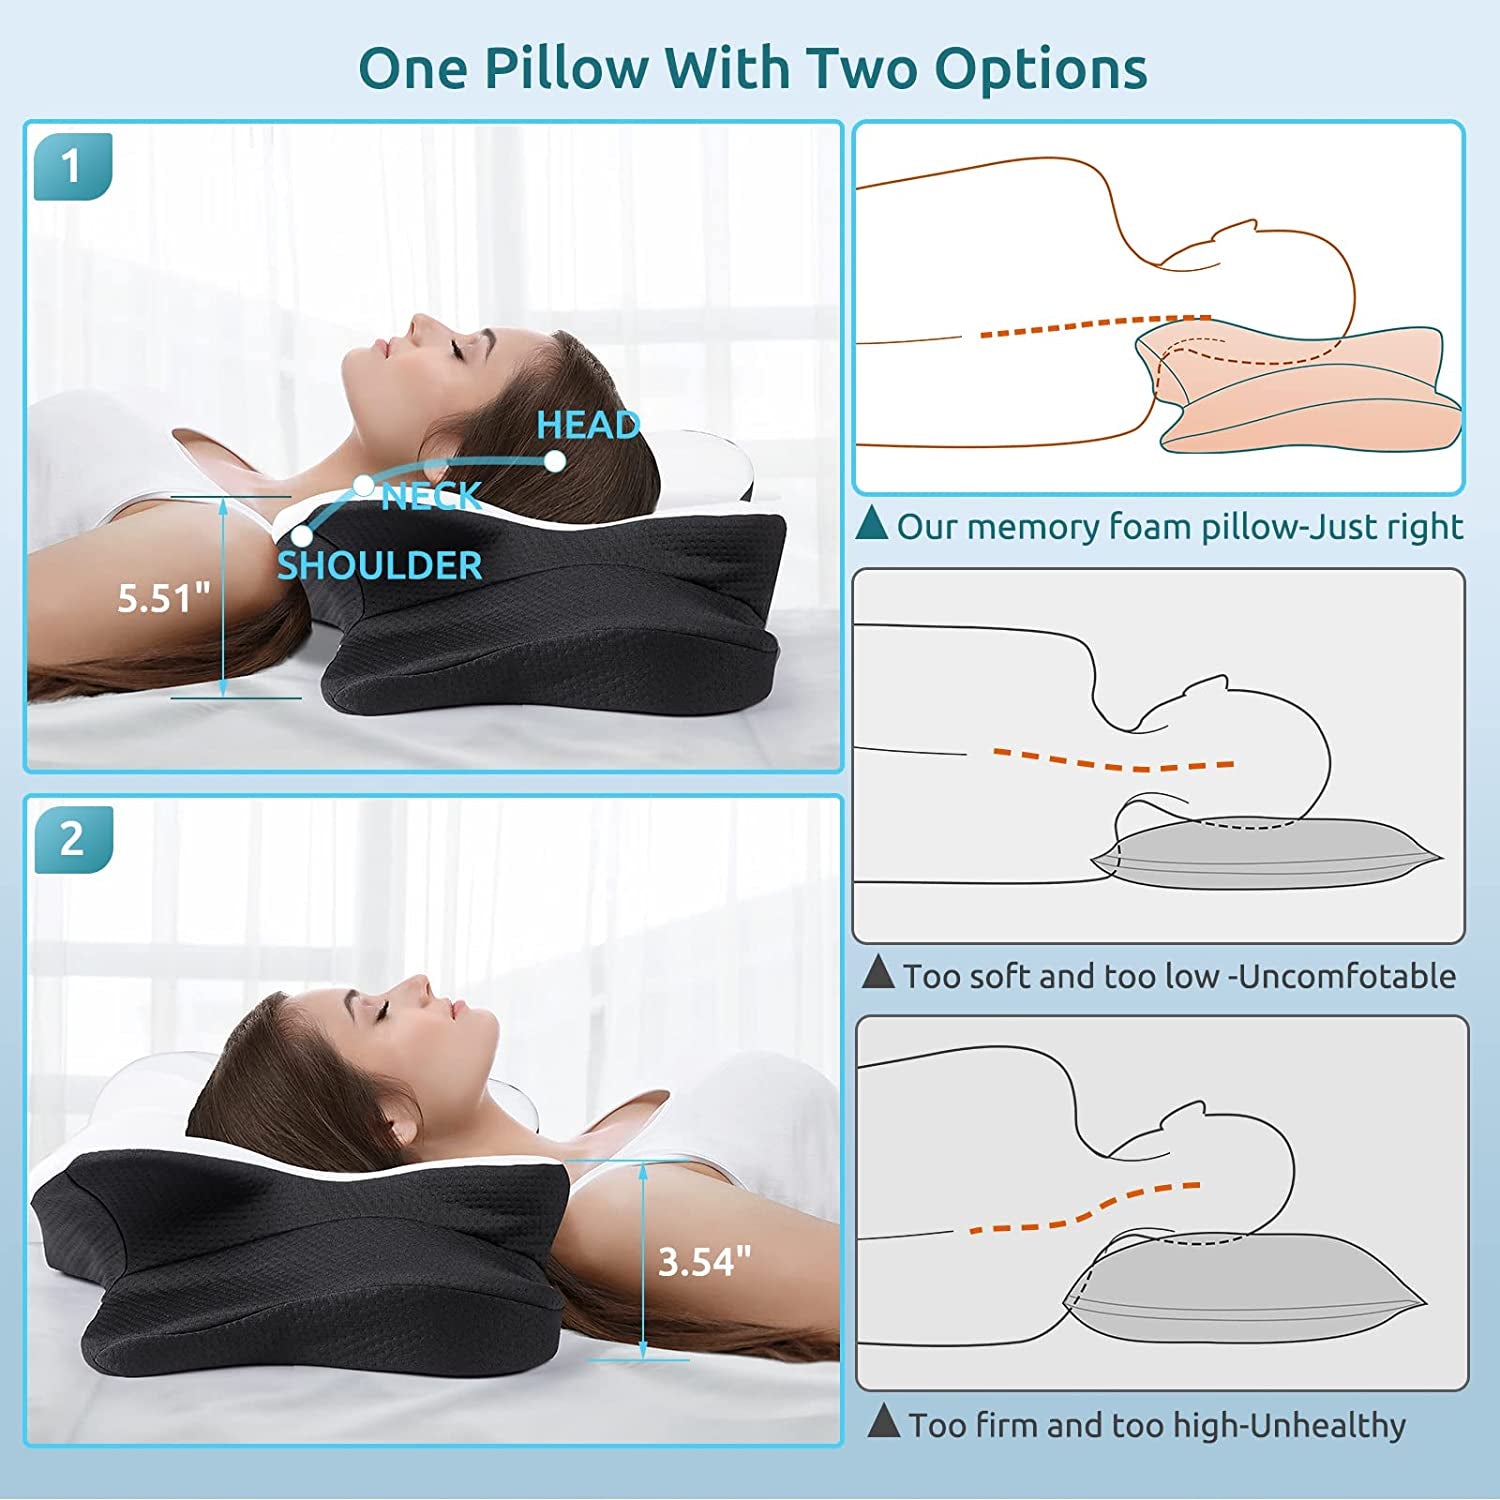 Cervical Pillow for Neck Pain Relief,Contour Memory Foam Pillow,Ergonomic Orthopedic Neck Support Pillow for Side,Back and Stomach Sleepers with Breathable Pillowcase-Black